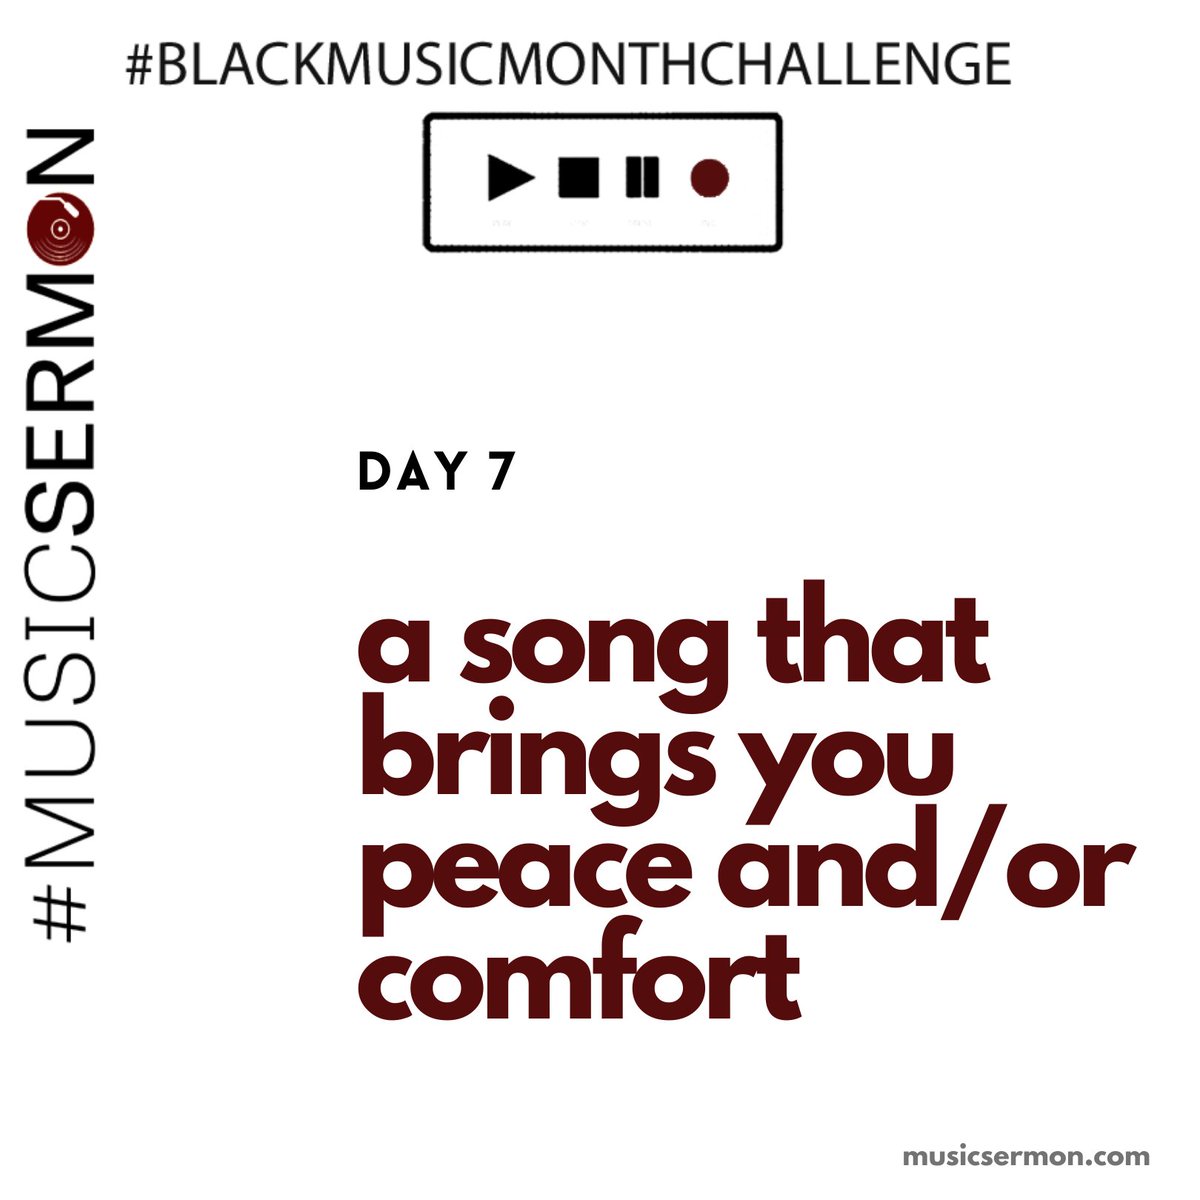 Today feels appropriate for Day 7's subject. We've talked about songs that make you feel invincible, songs that give you hope, songs that stoke your anger. Now, let's talk about songs that bring you comfort and/or peace.  #BlackMusicMonthChallenge